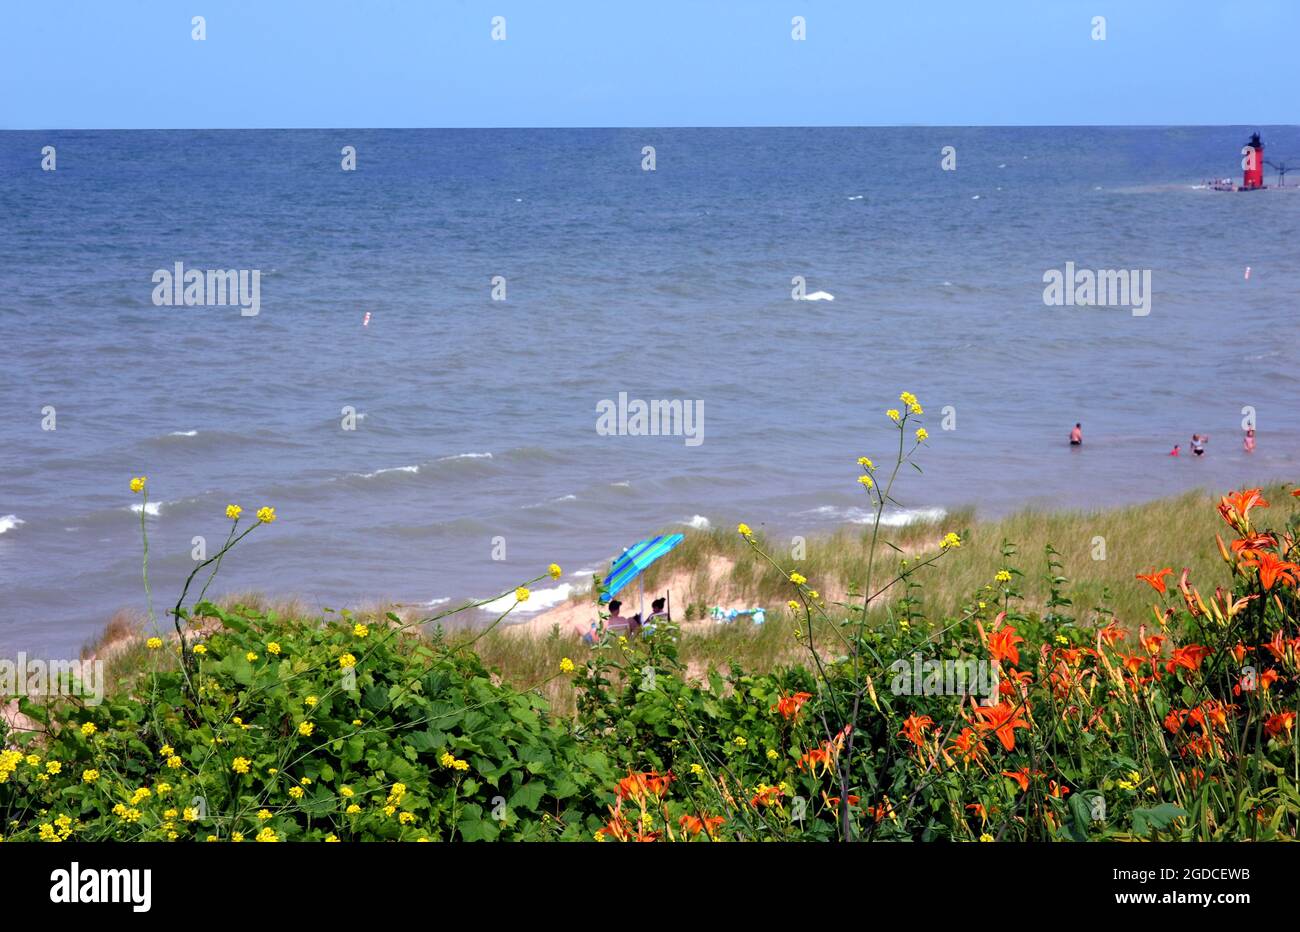 Brightly colored beach umbrellla provides shade on a hot day in July at South Haven, Michigan.  Beach goers enjoy the distant view of the South Haven Stock Photo